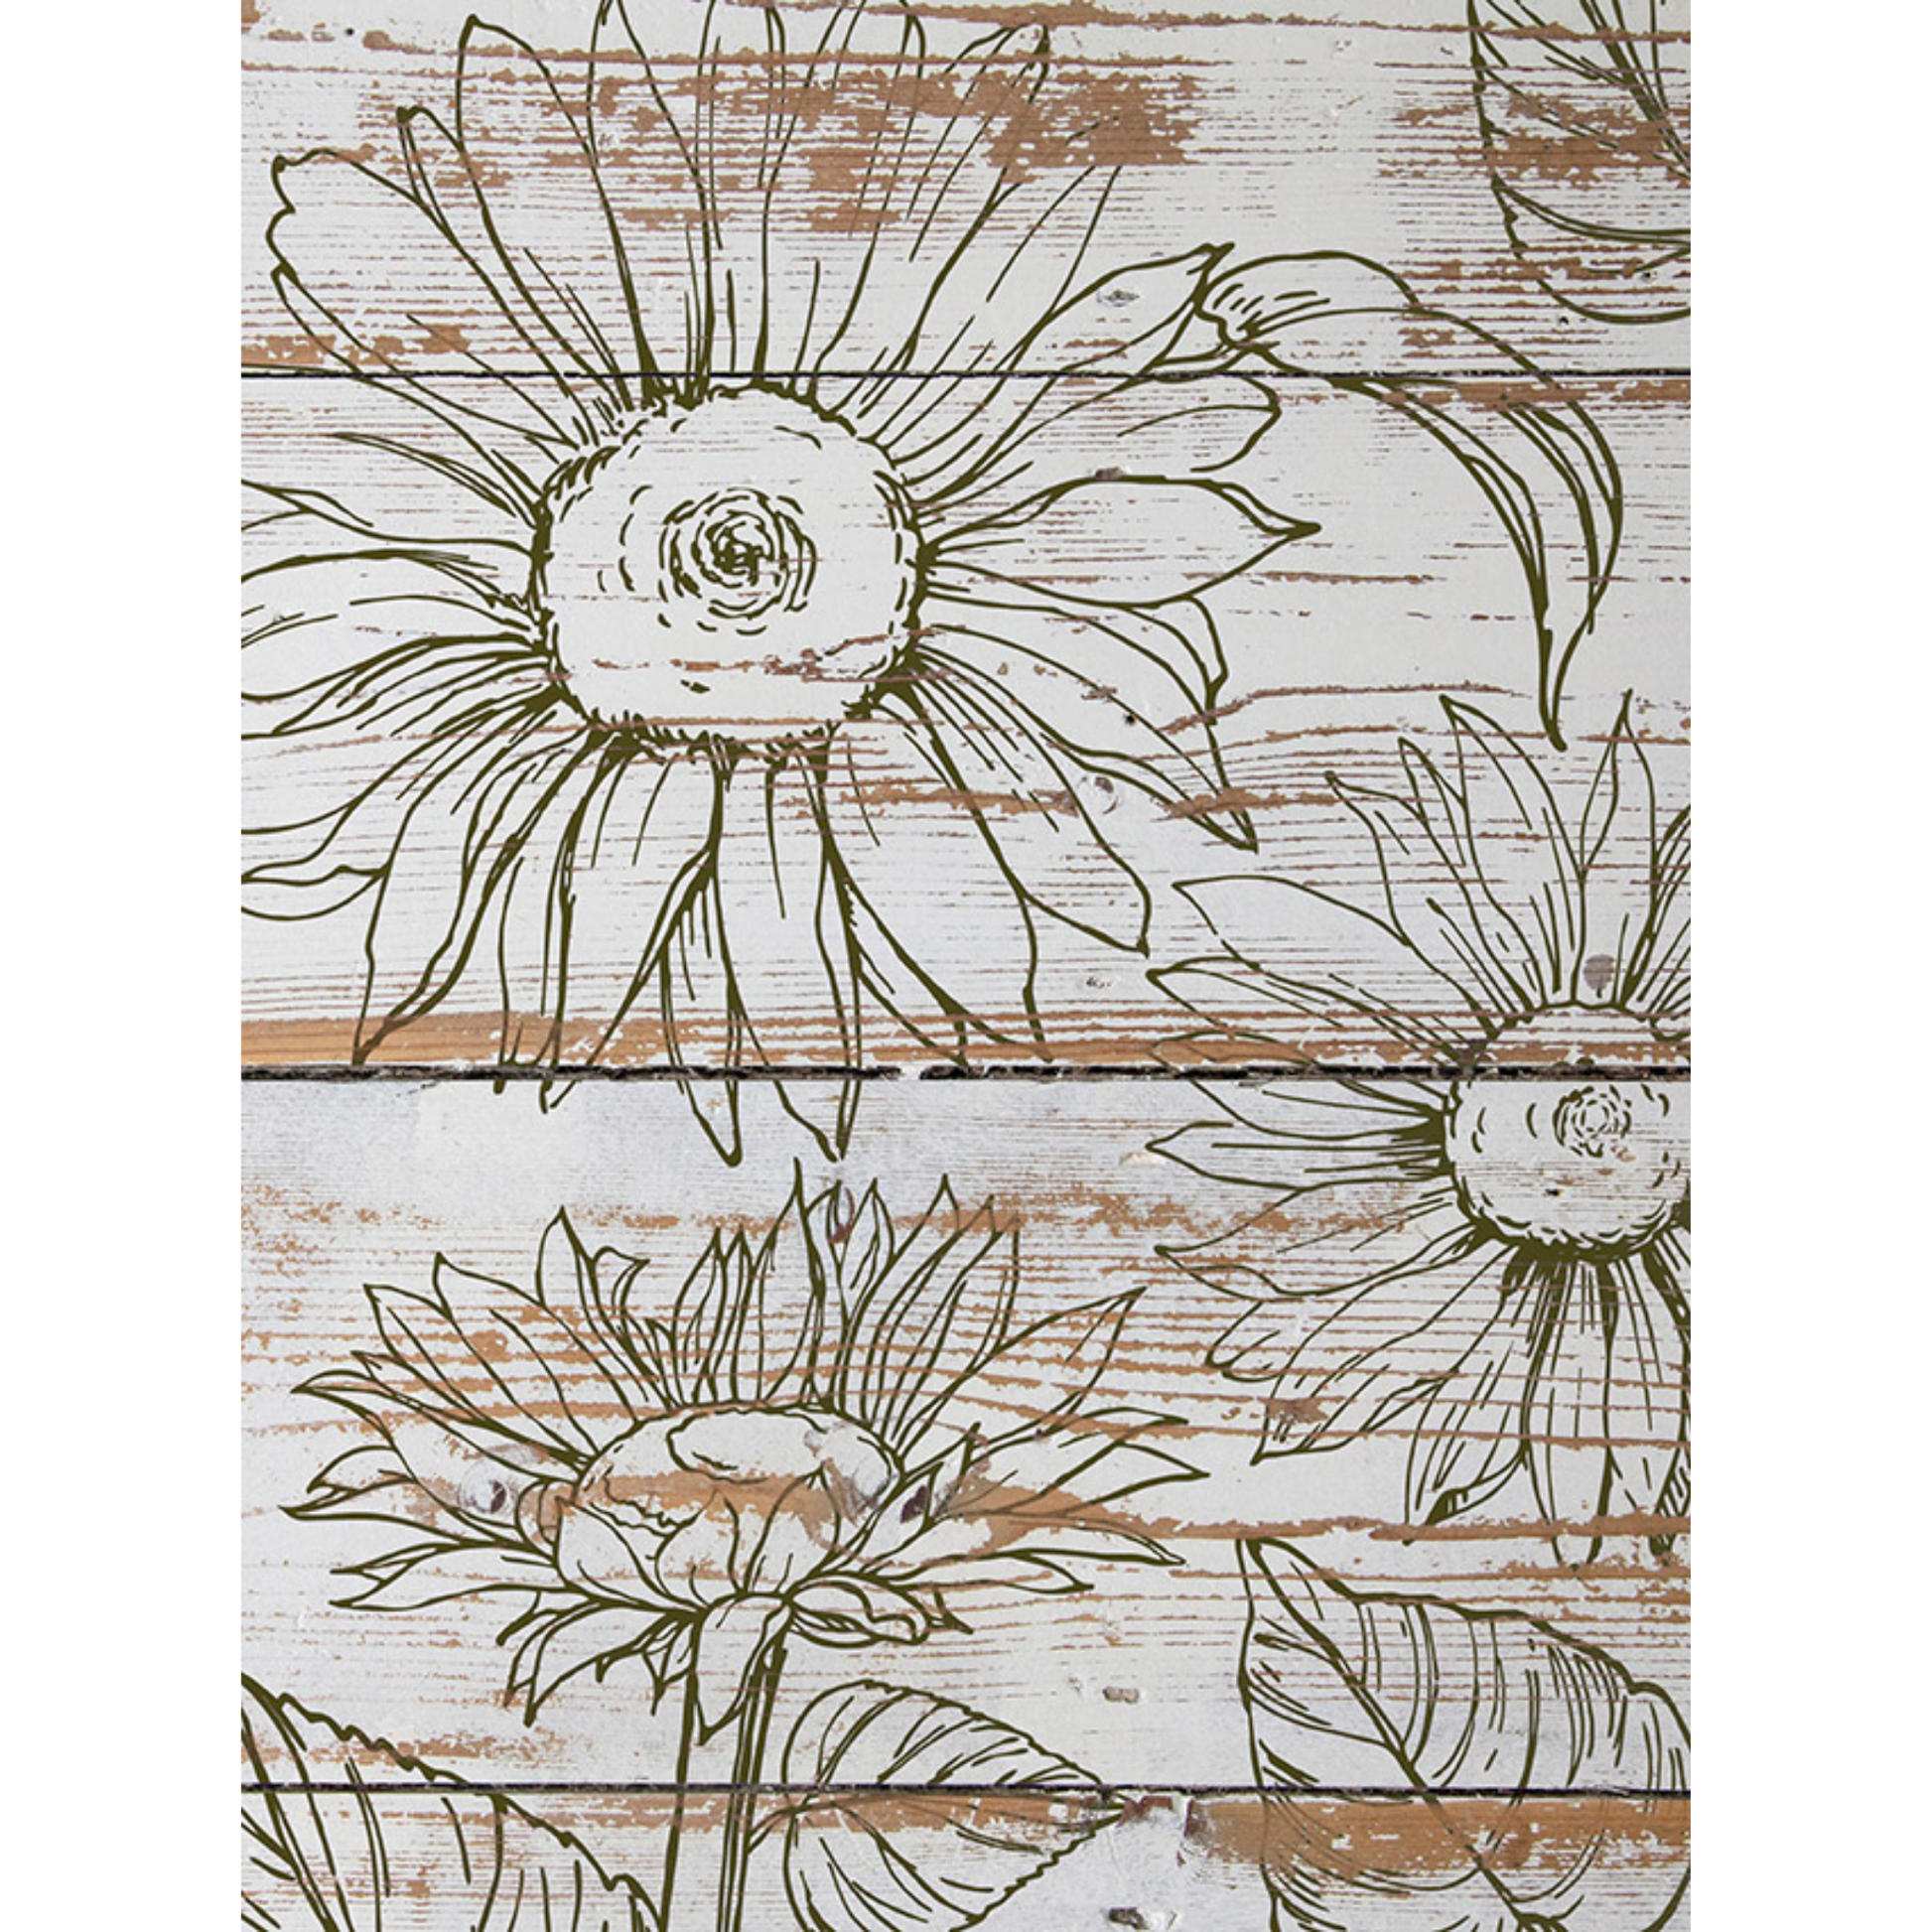 Sunflowers Stamp by IOD sample on distressed wood available at Milton's Daughter